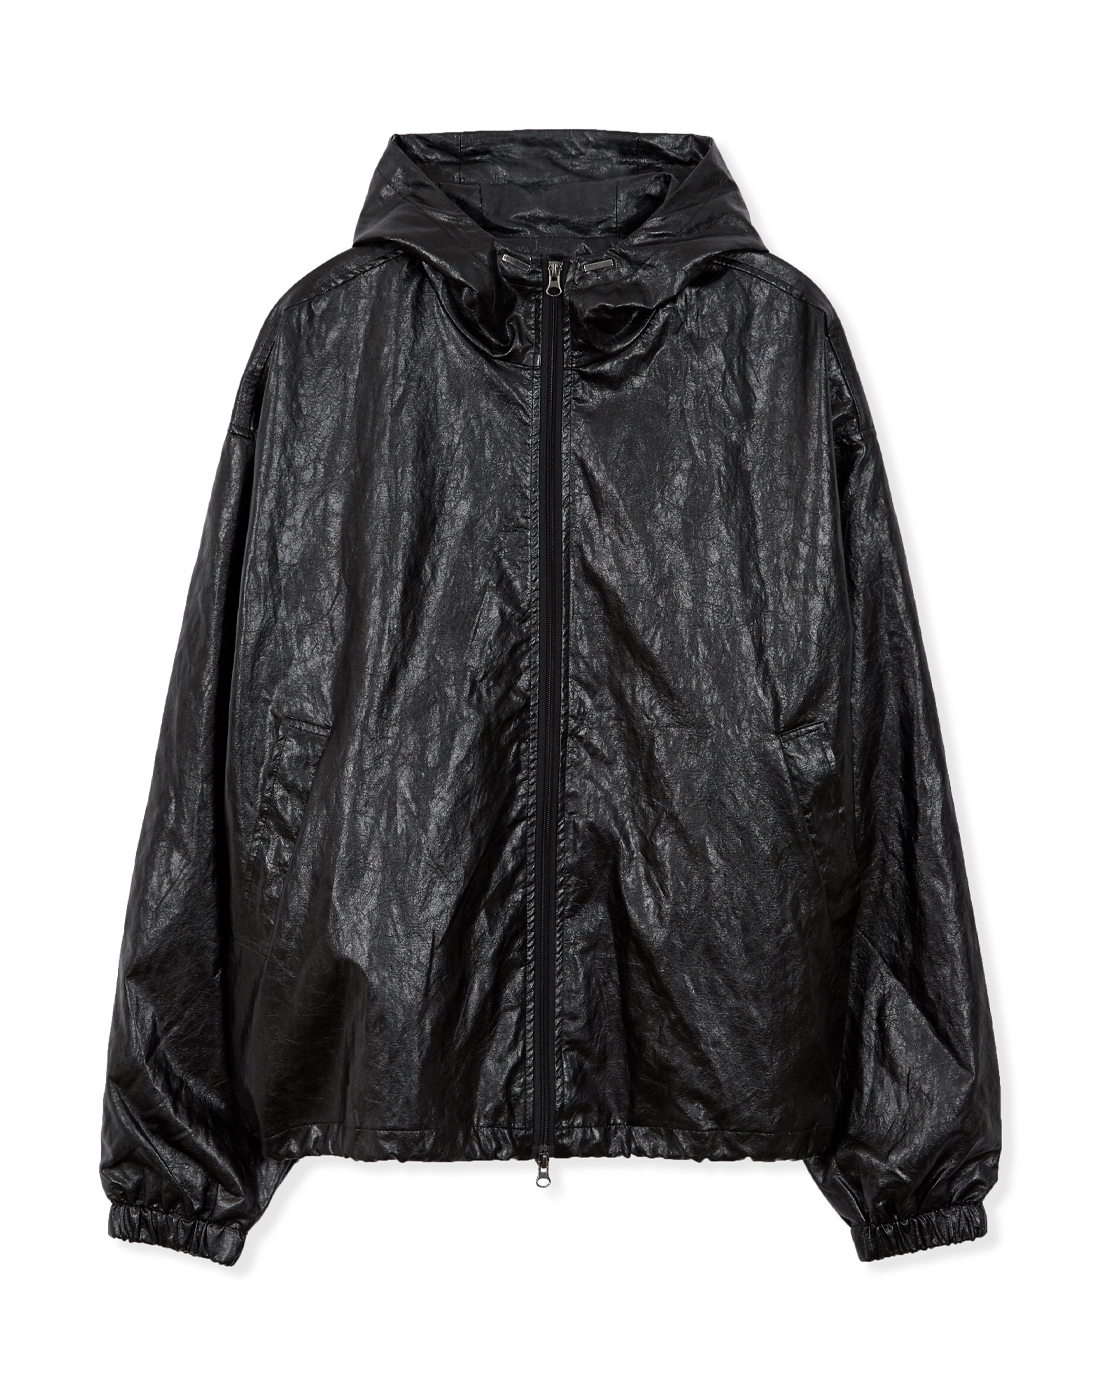 VCL crepe leather overfit hoodie zip-up black